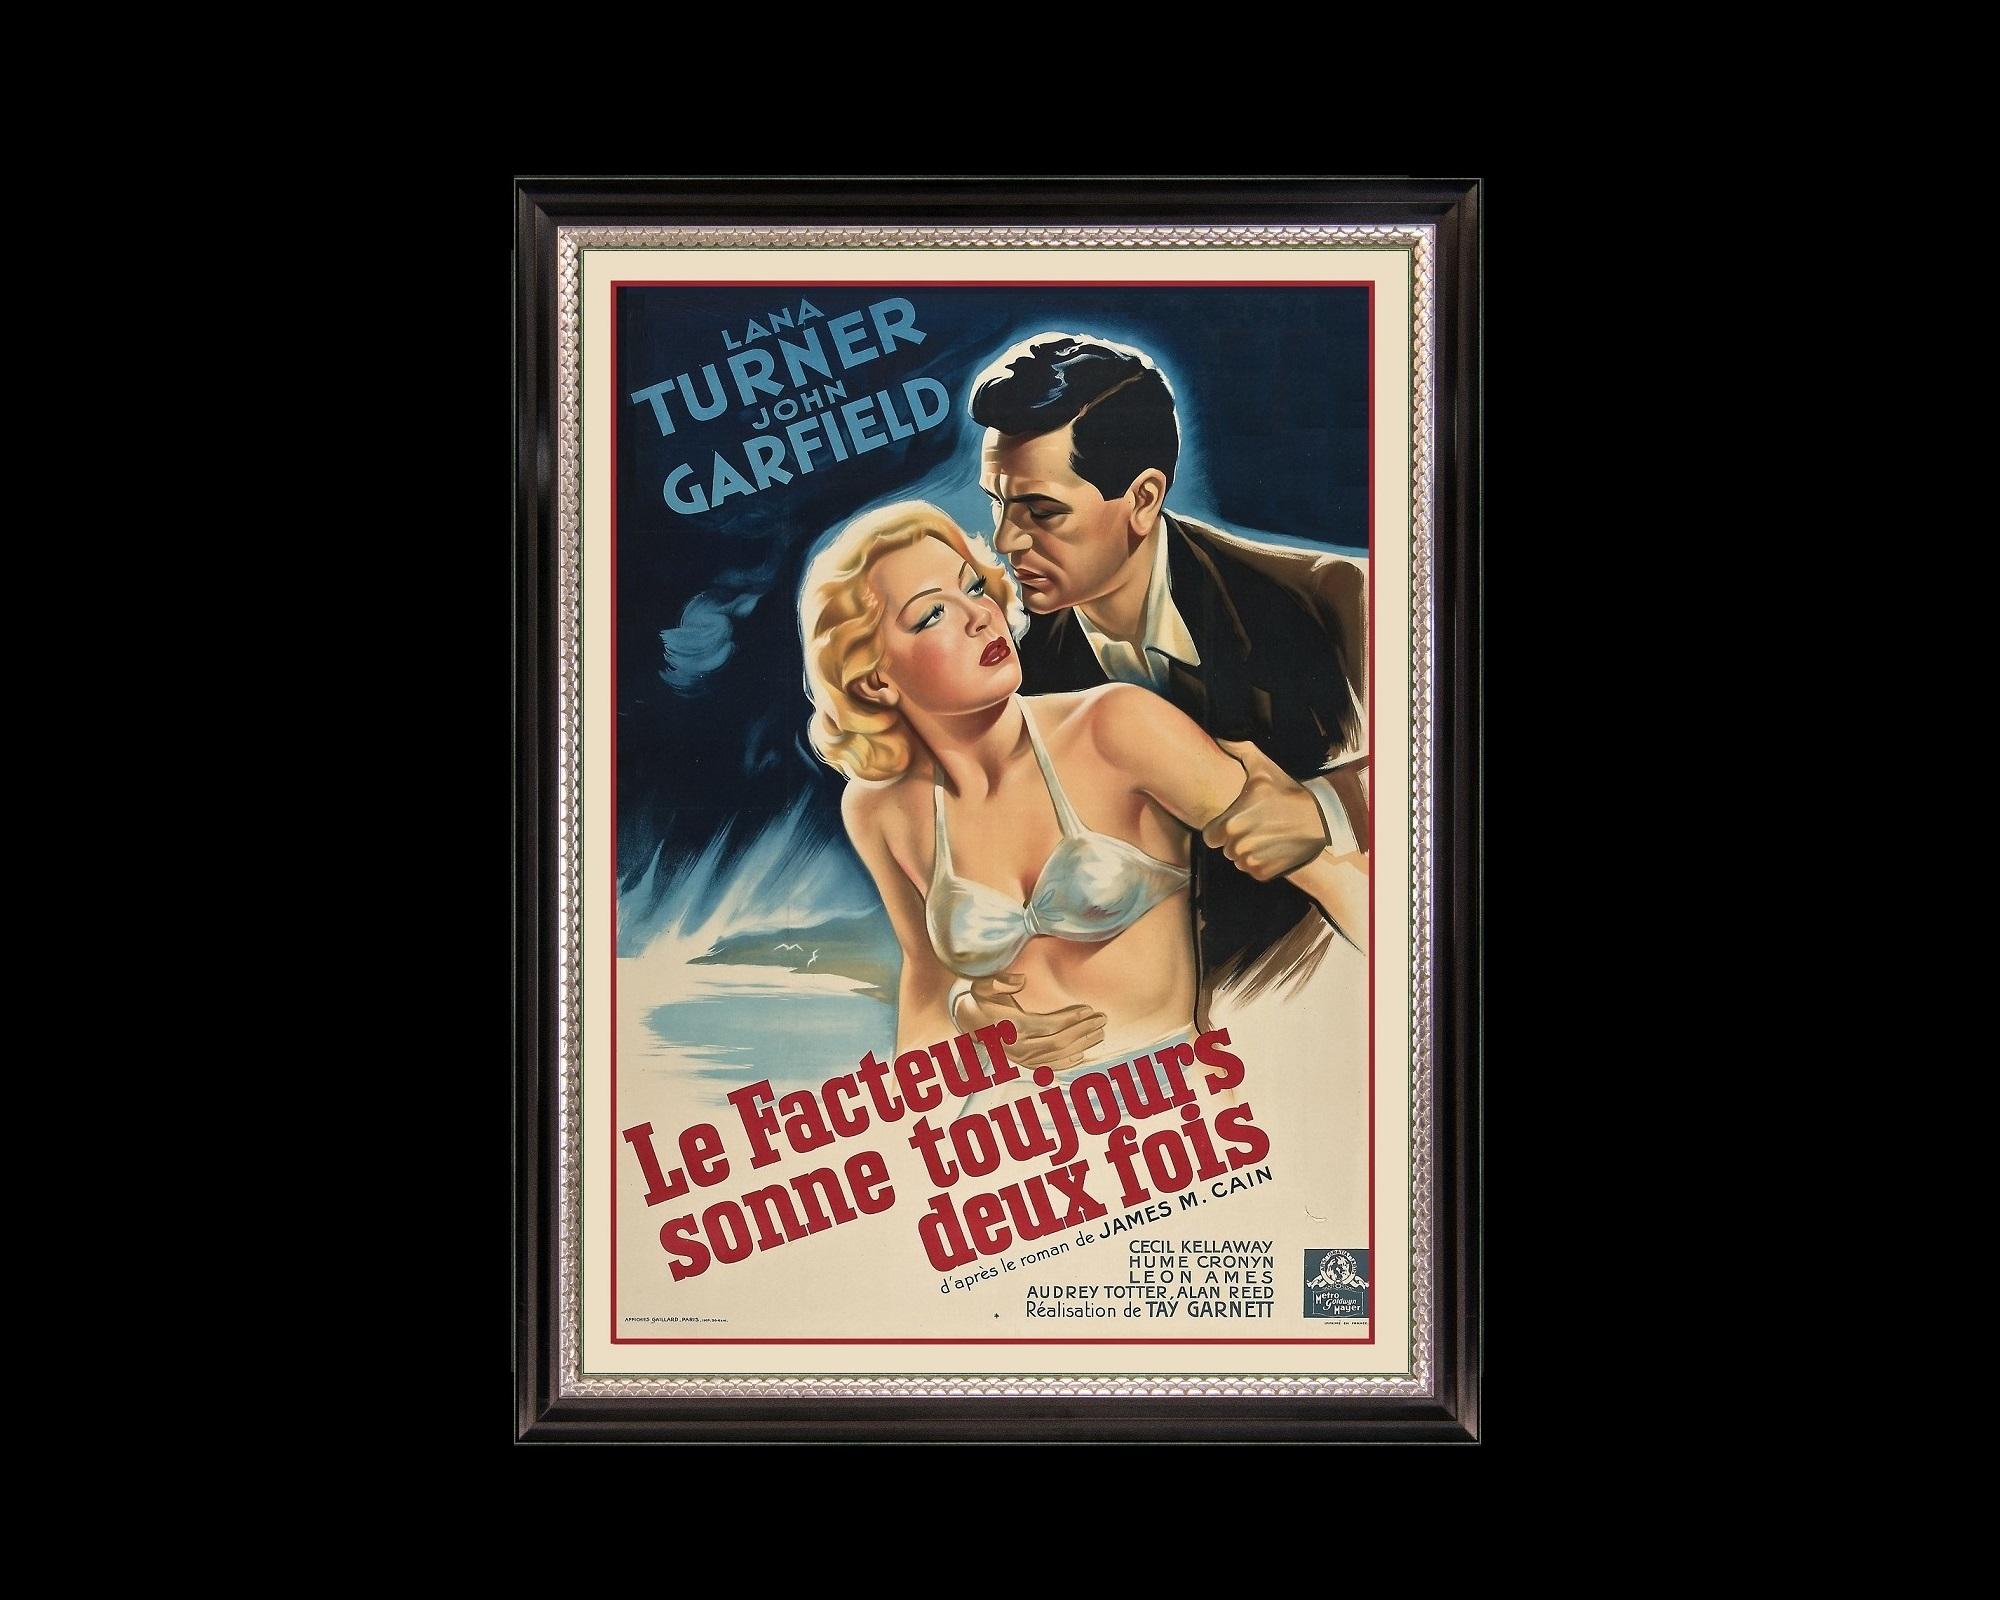 This large Hollywood Regency poster is a faithful yet nuanced reproduction of a vintage movie poster titled 